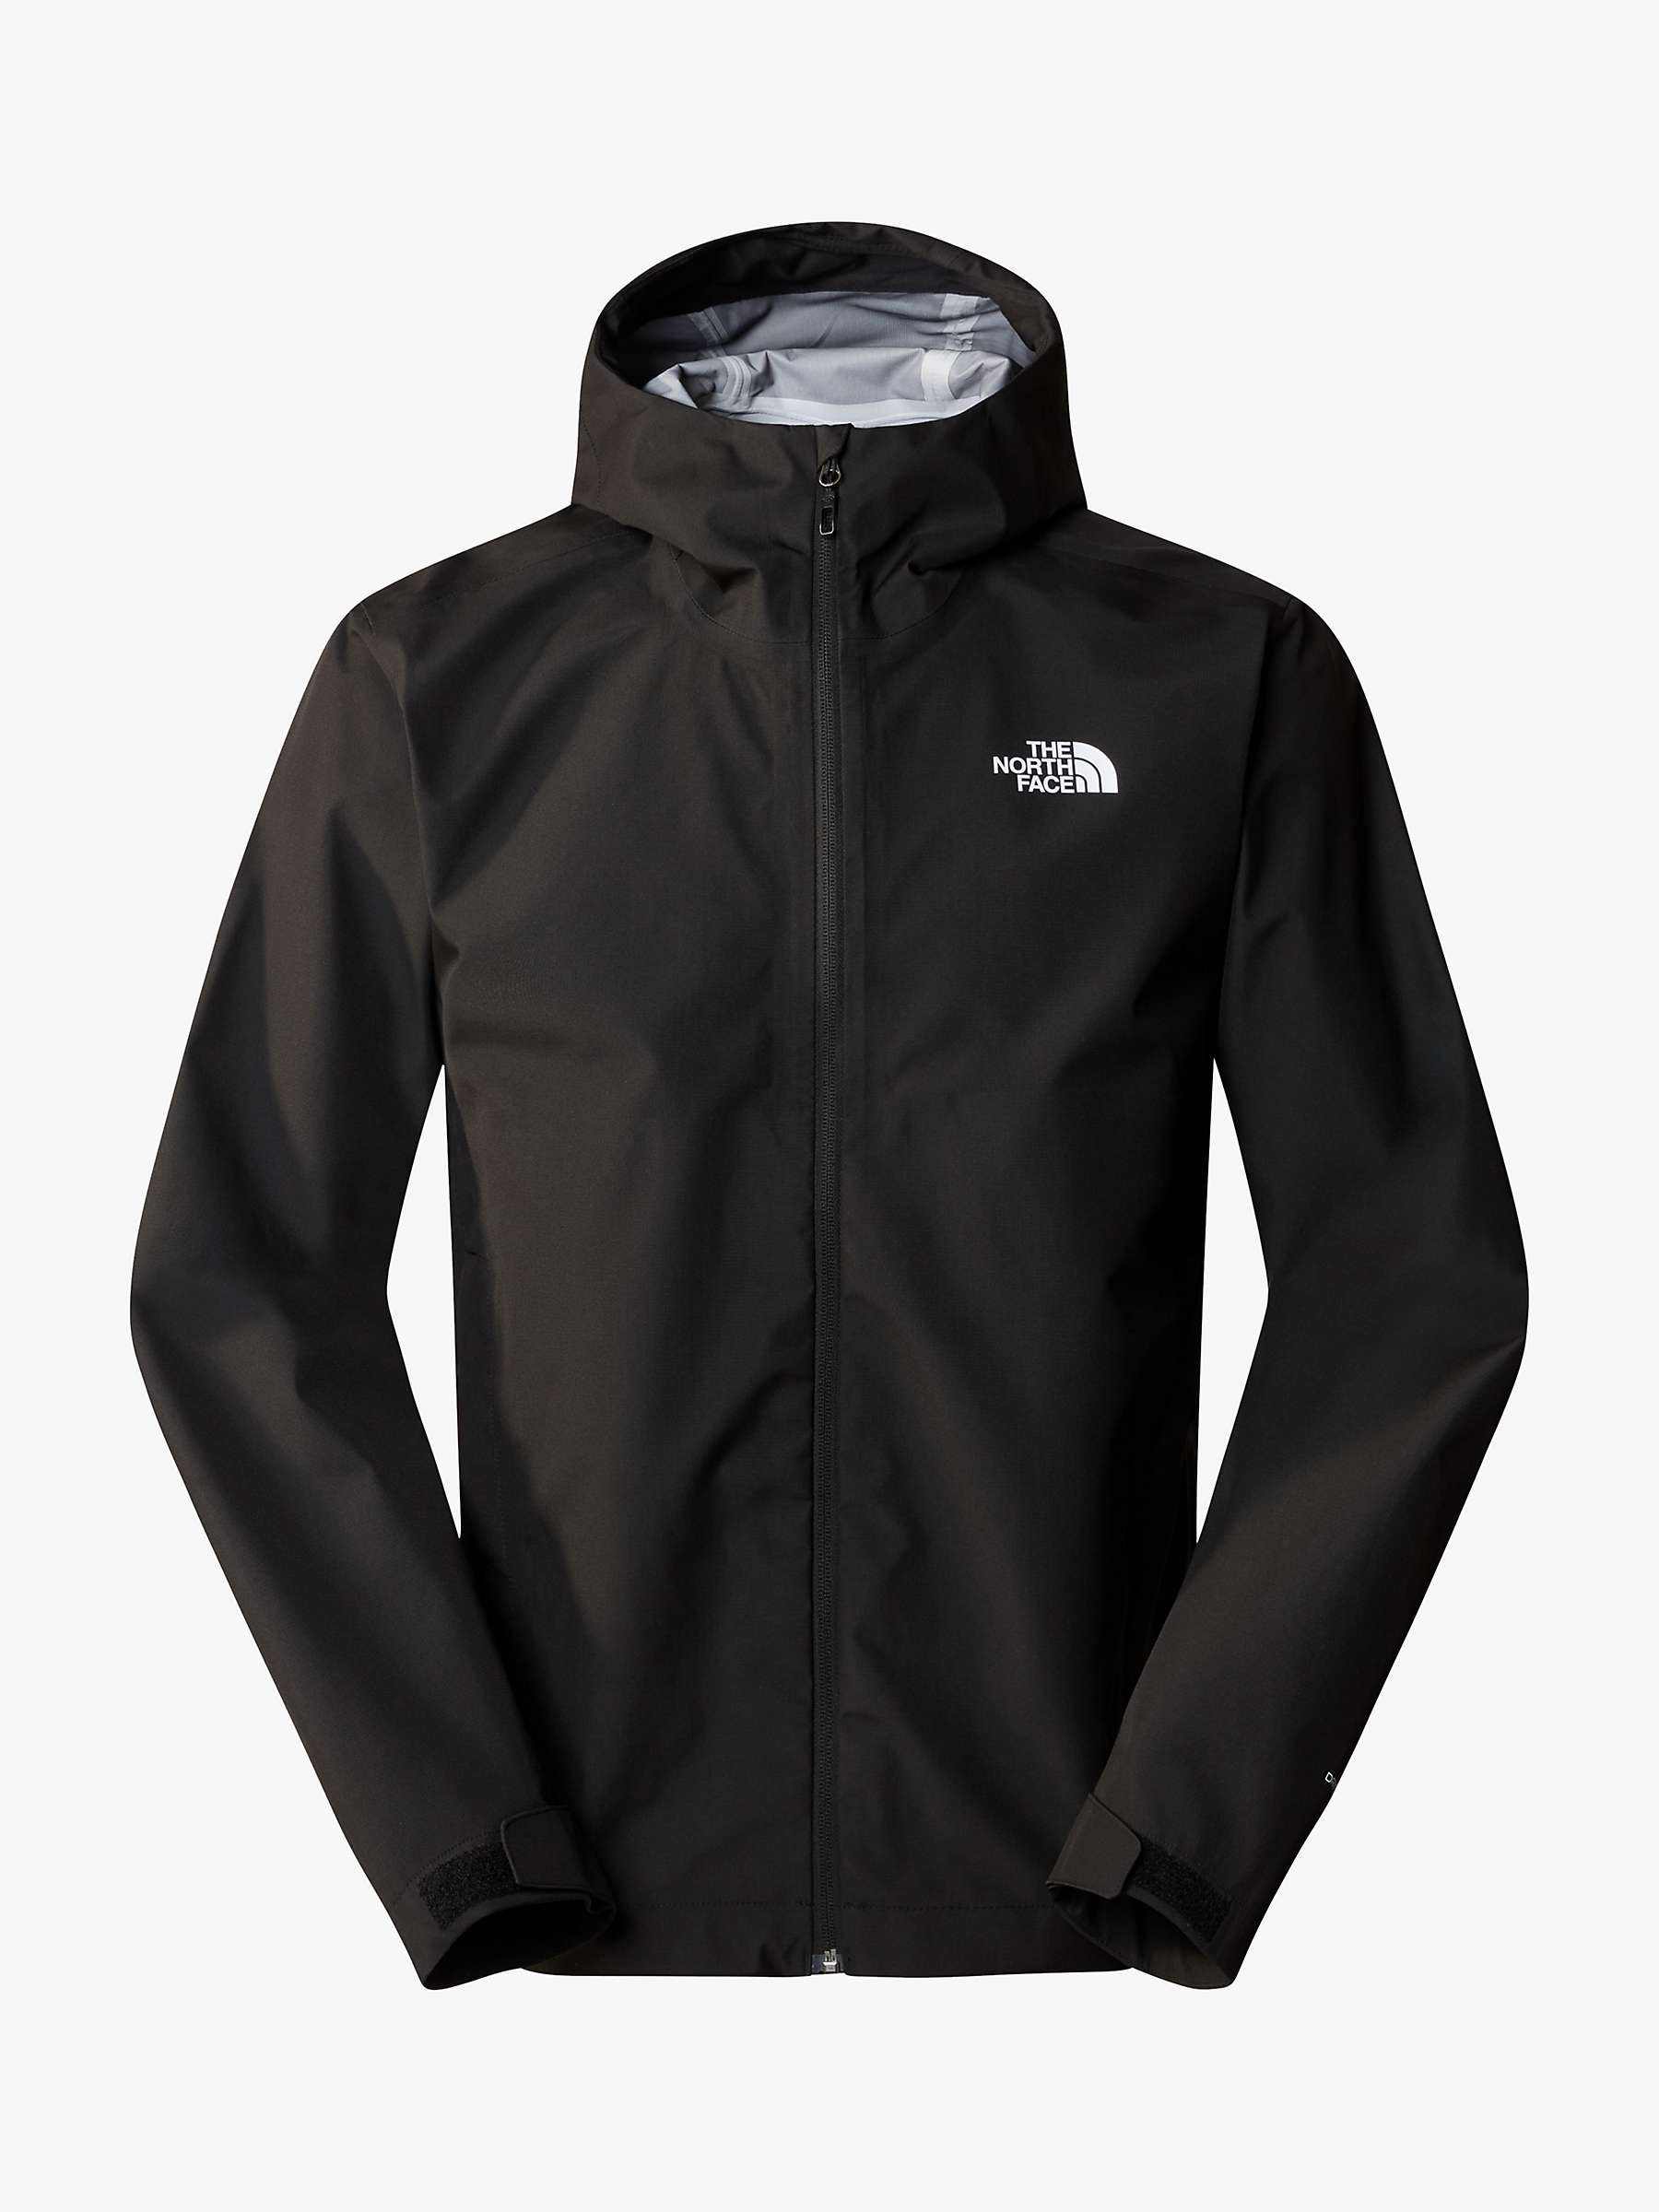 Buy The North Face Whiton 3 Layer Jacket, Black Online at johnlewis.com